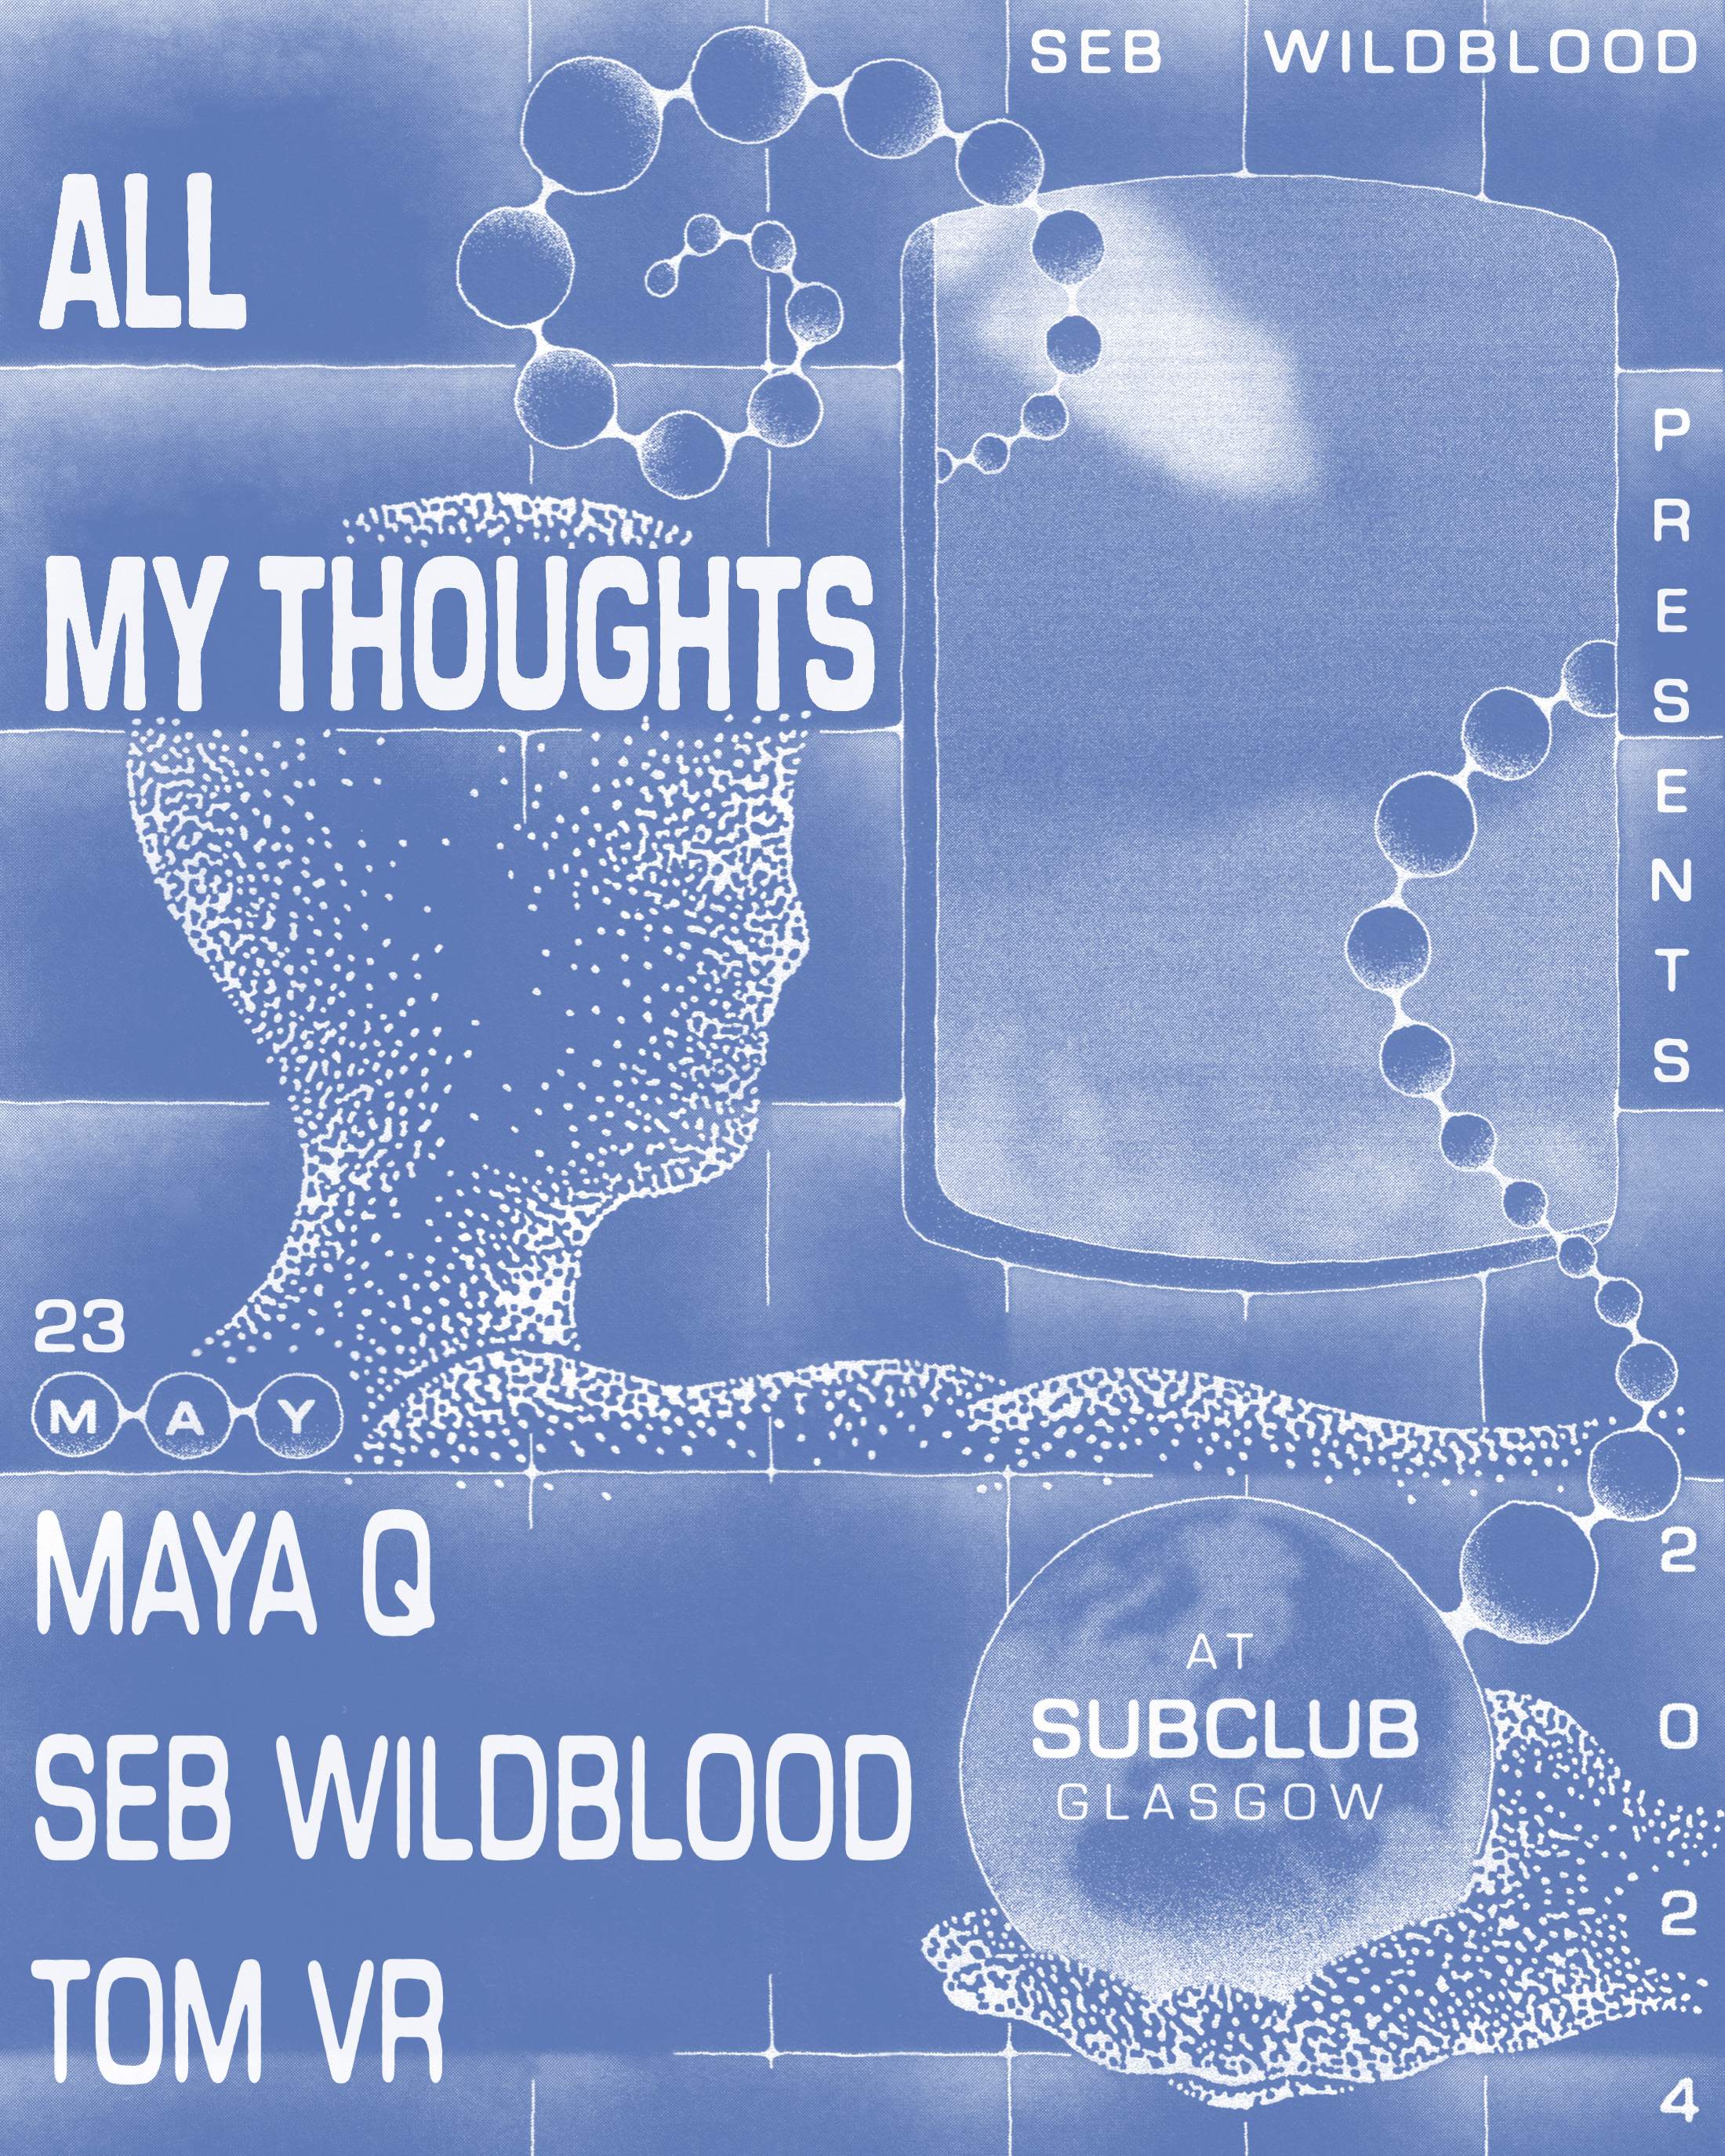 [RESCHEDULED] all my thoughts - label night  - Página frontal